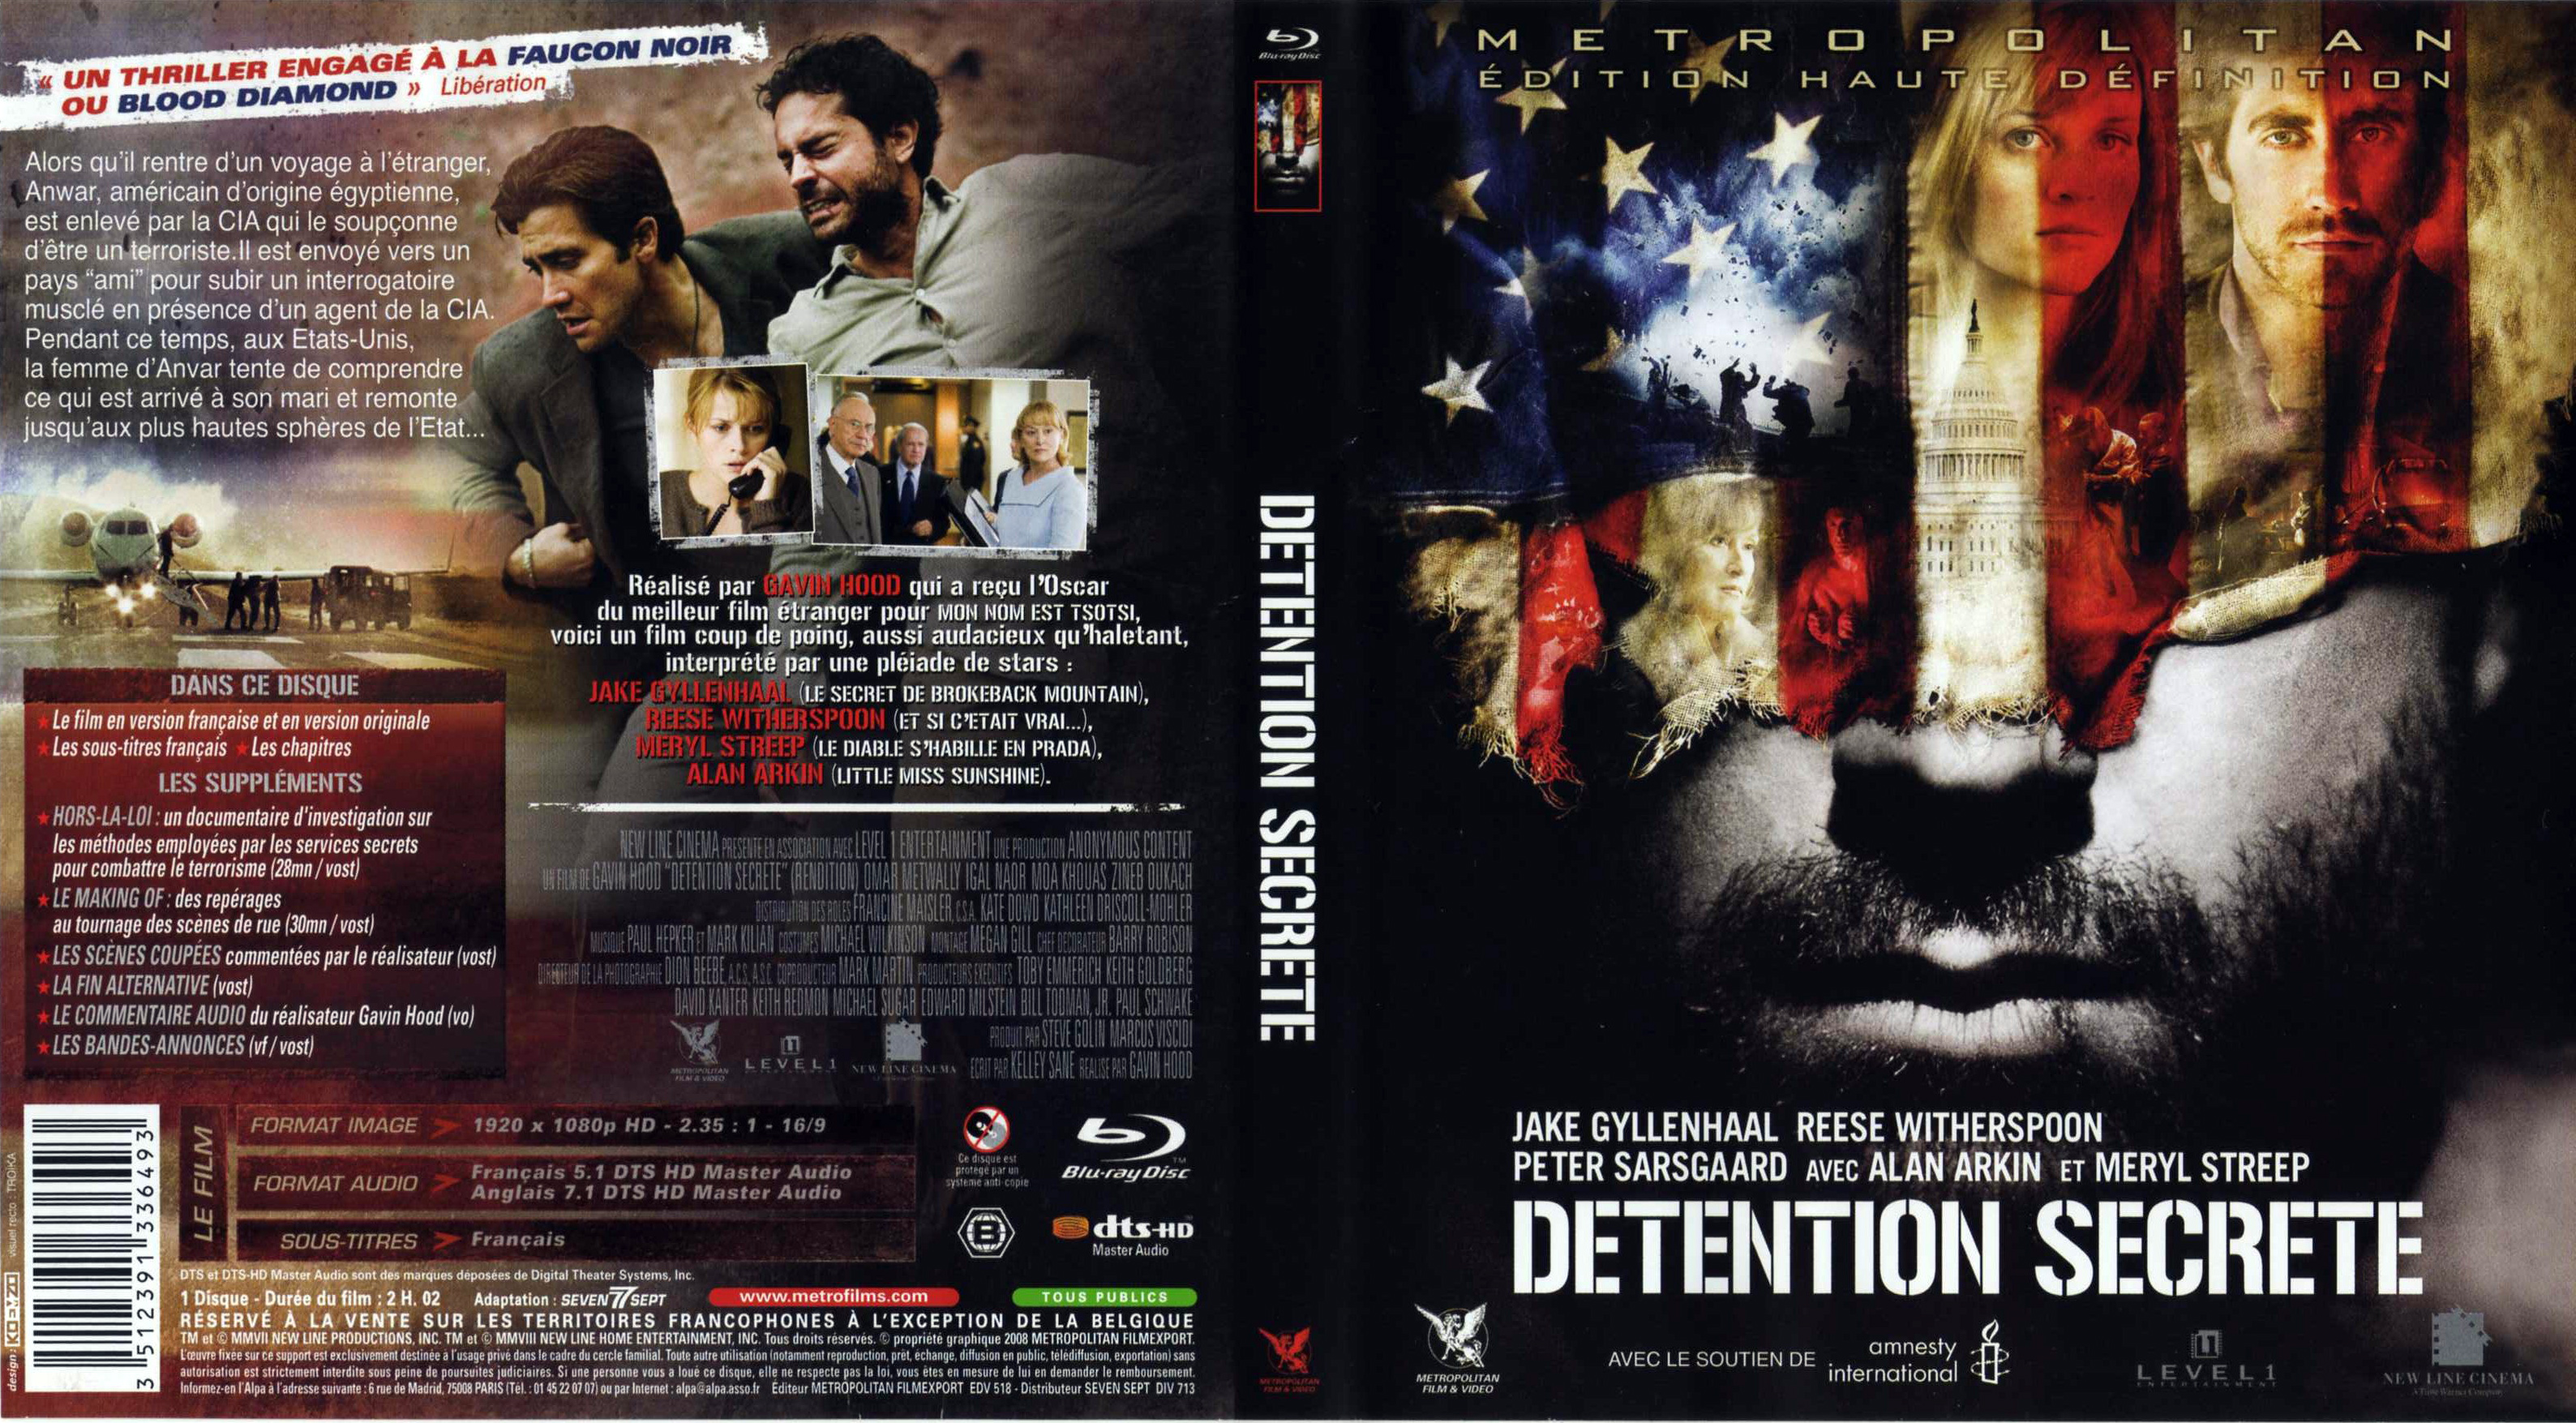 Jaquette DVD Dtention secrte (BLU-RAY)